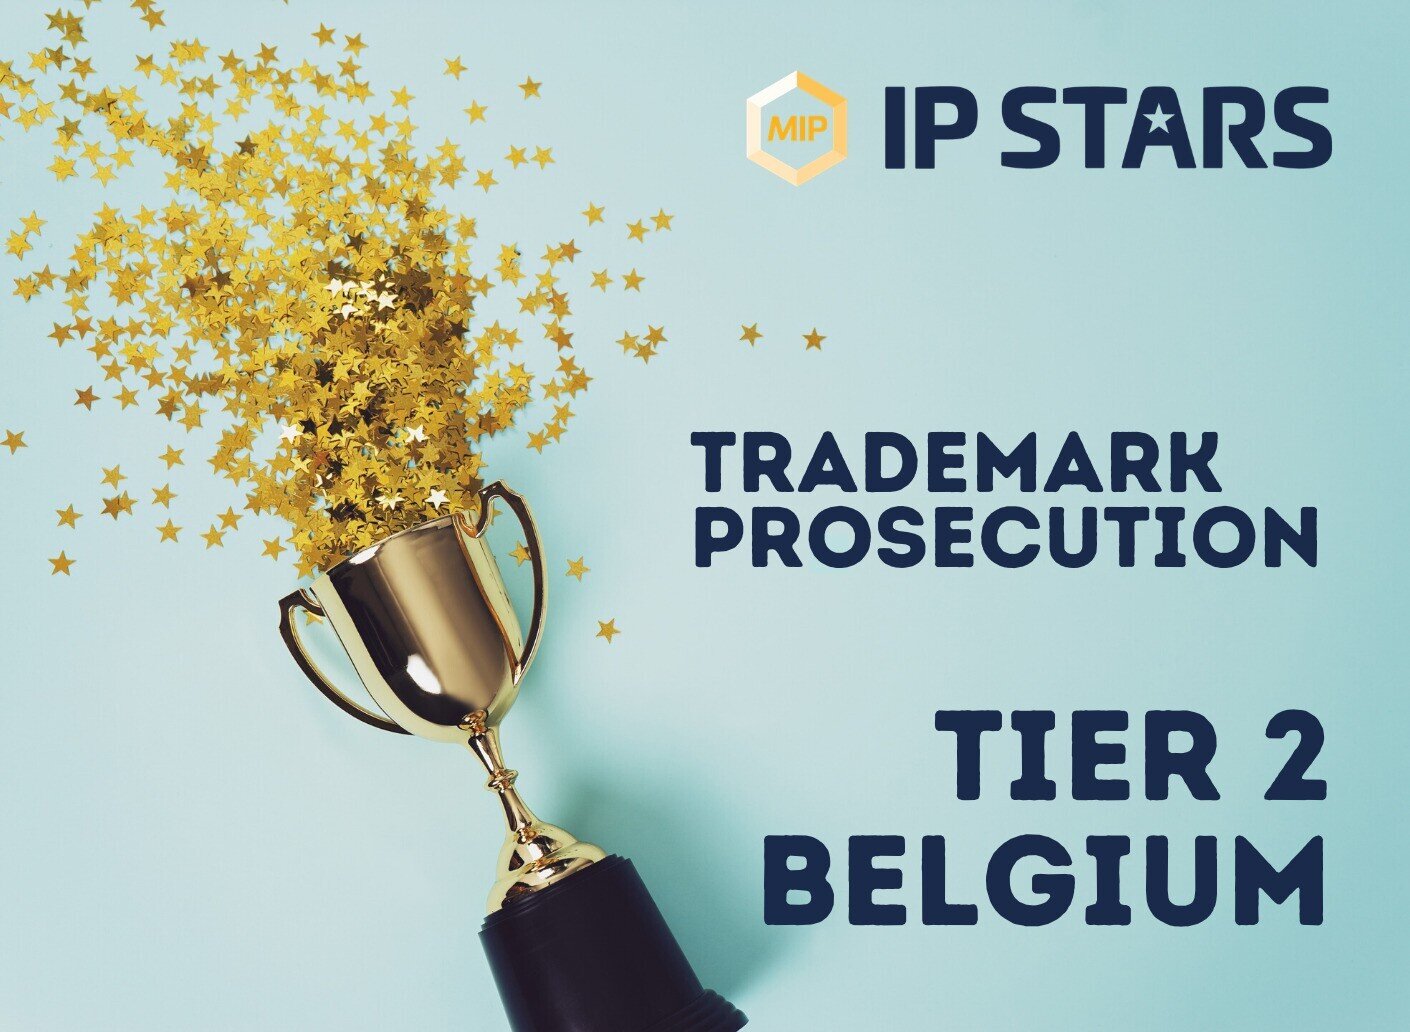 MIP reveals 2020 rankings for Trademark Prosecution firms